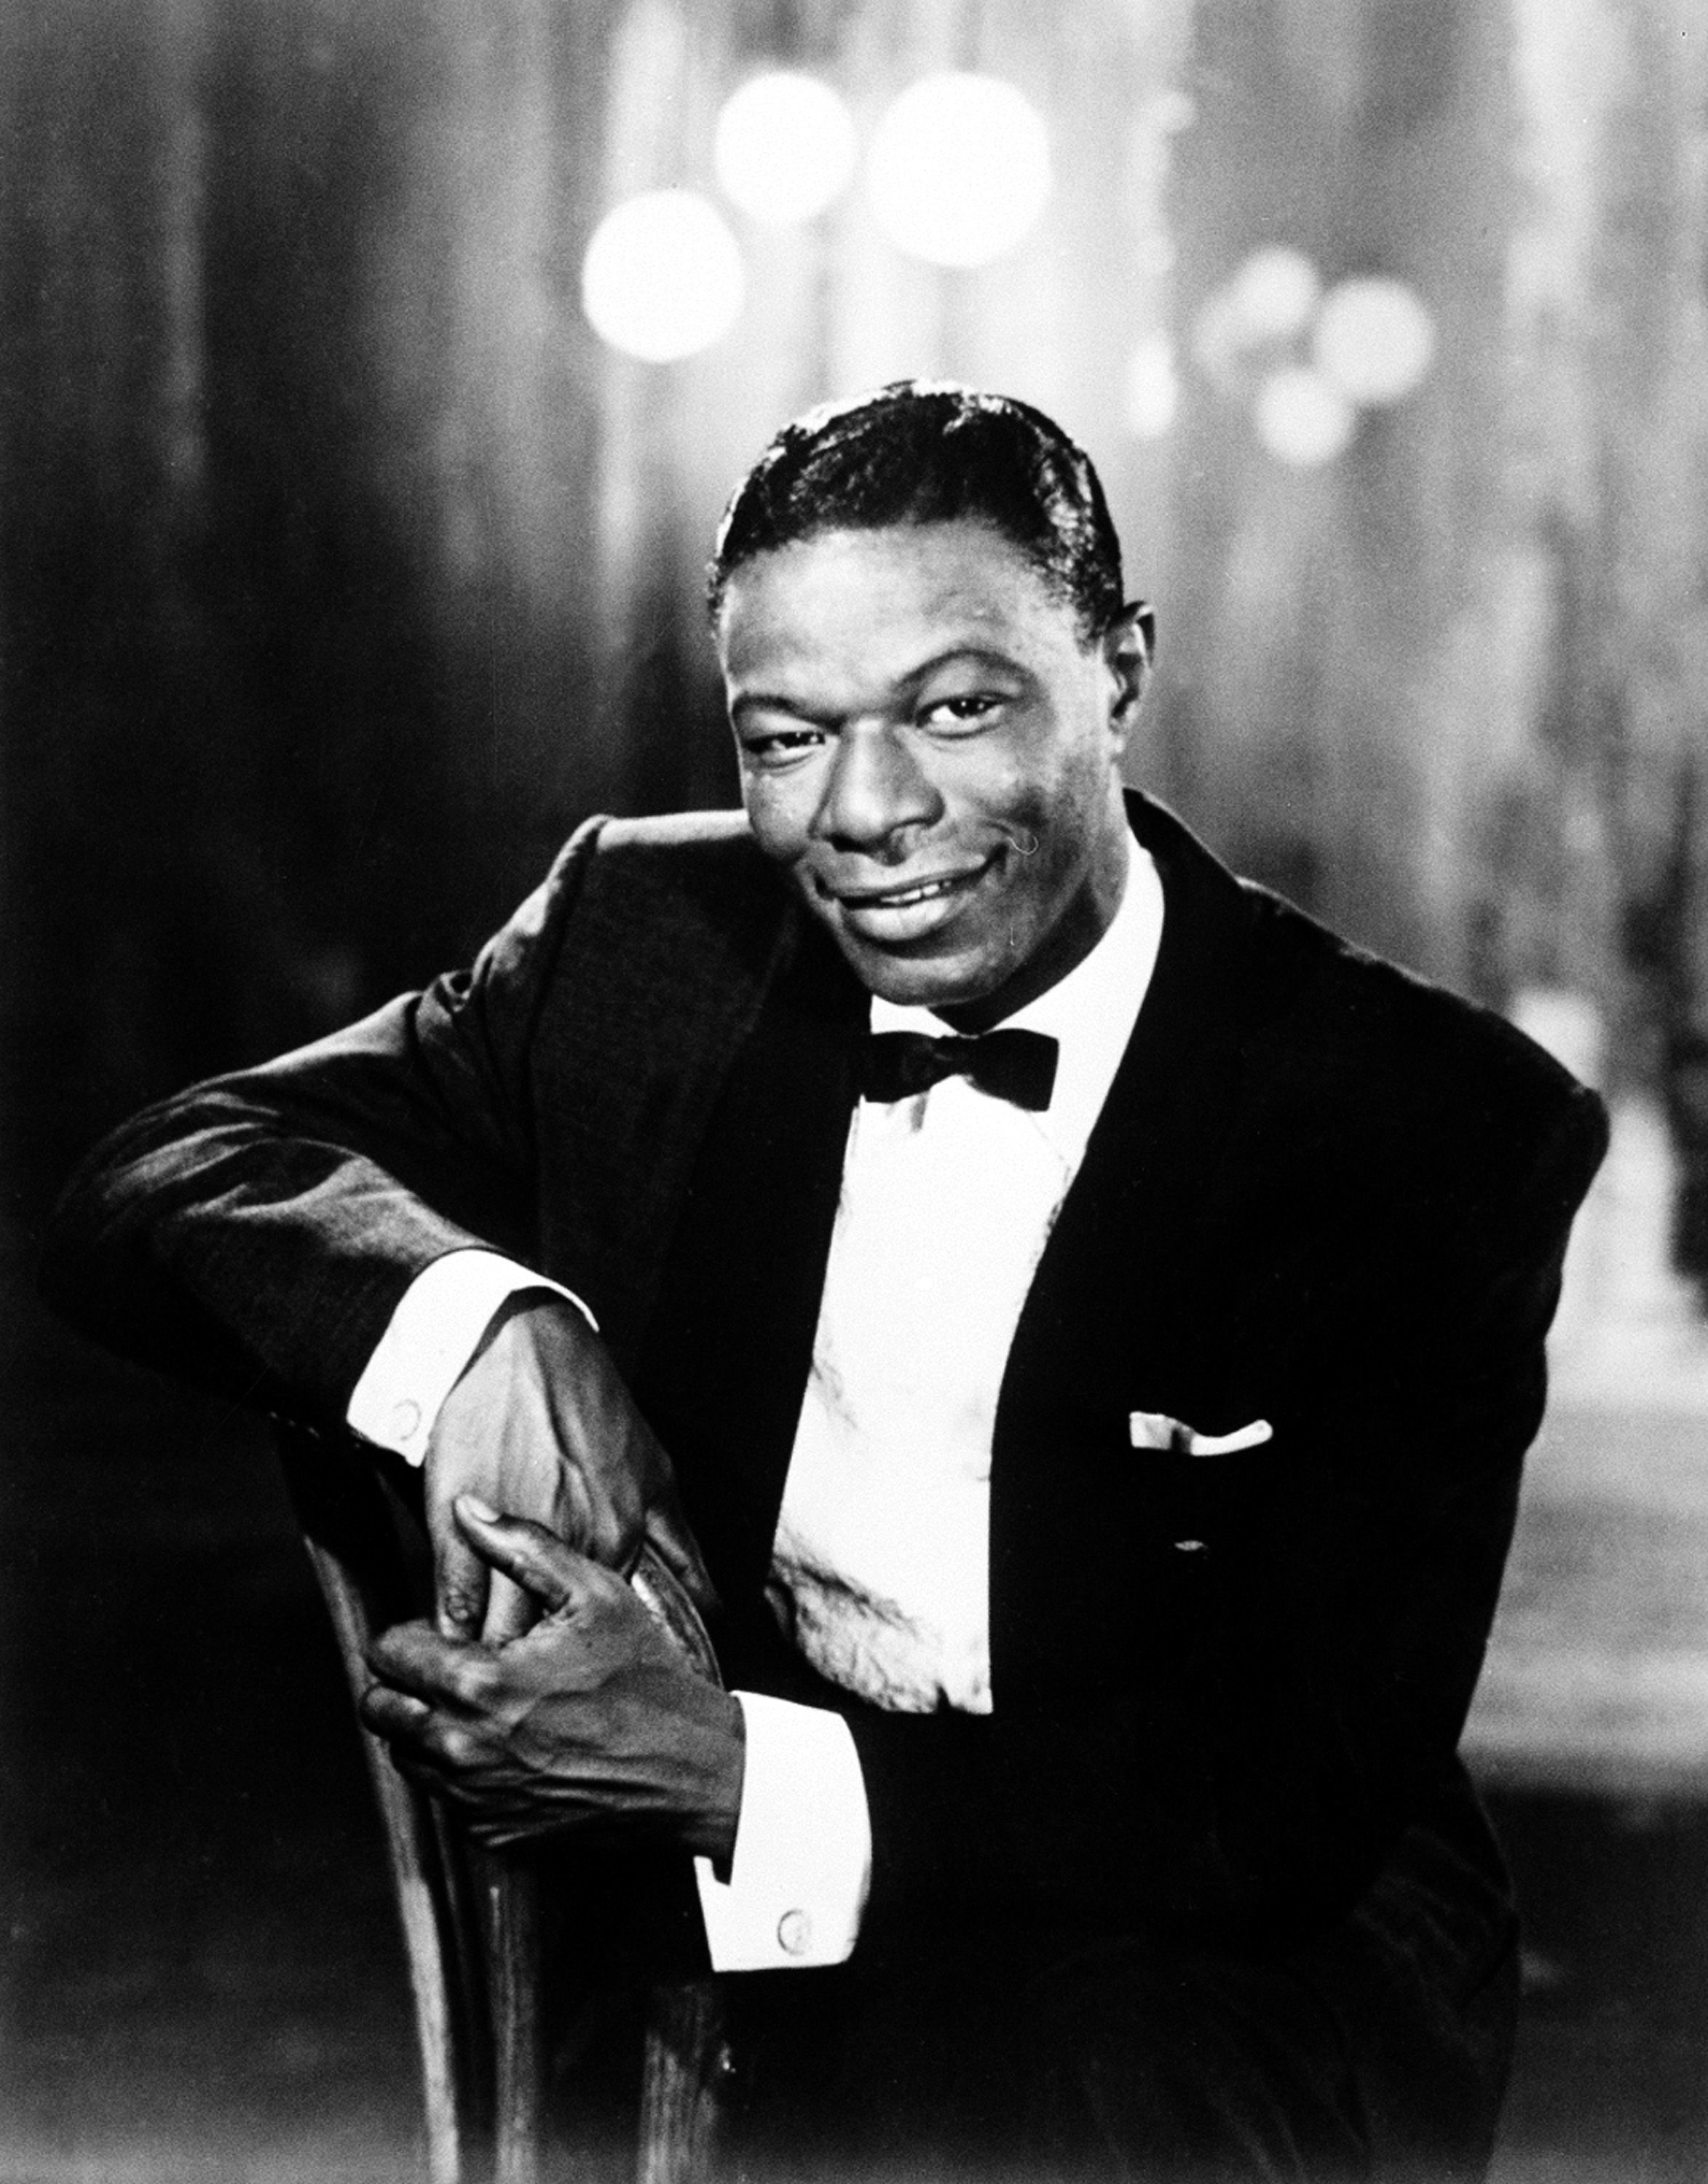 <p>Nat King Cole became the first Black network television host when his show, "The Nat King Cole Show," debuted on NBC in 1956. The series ended one year later due to a lack of sponsorship. Nat commented at the time, "Madison Avenue is afraid of the dark."</p>